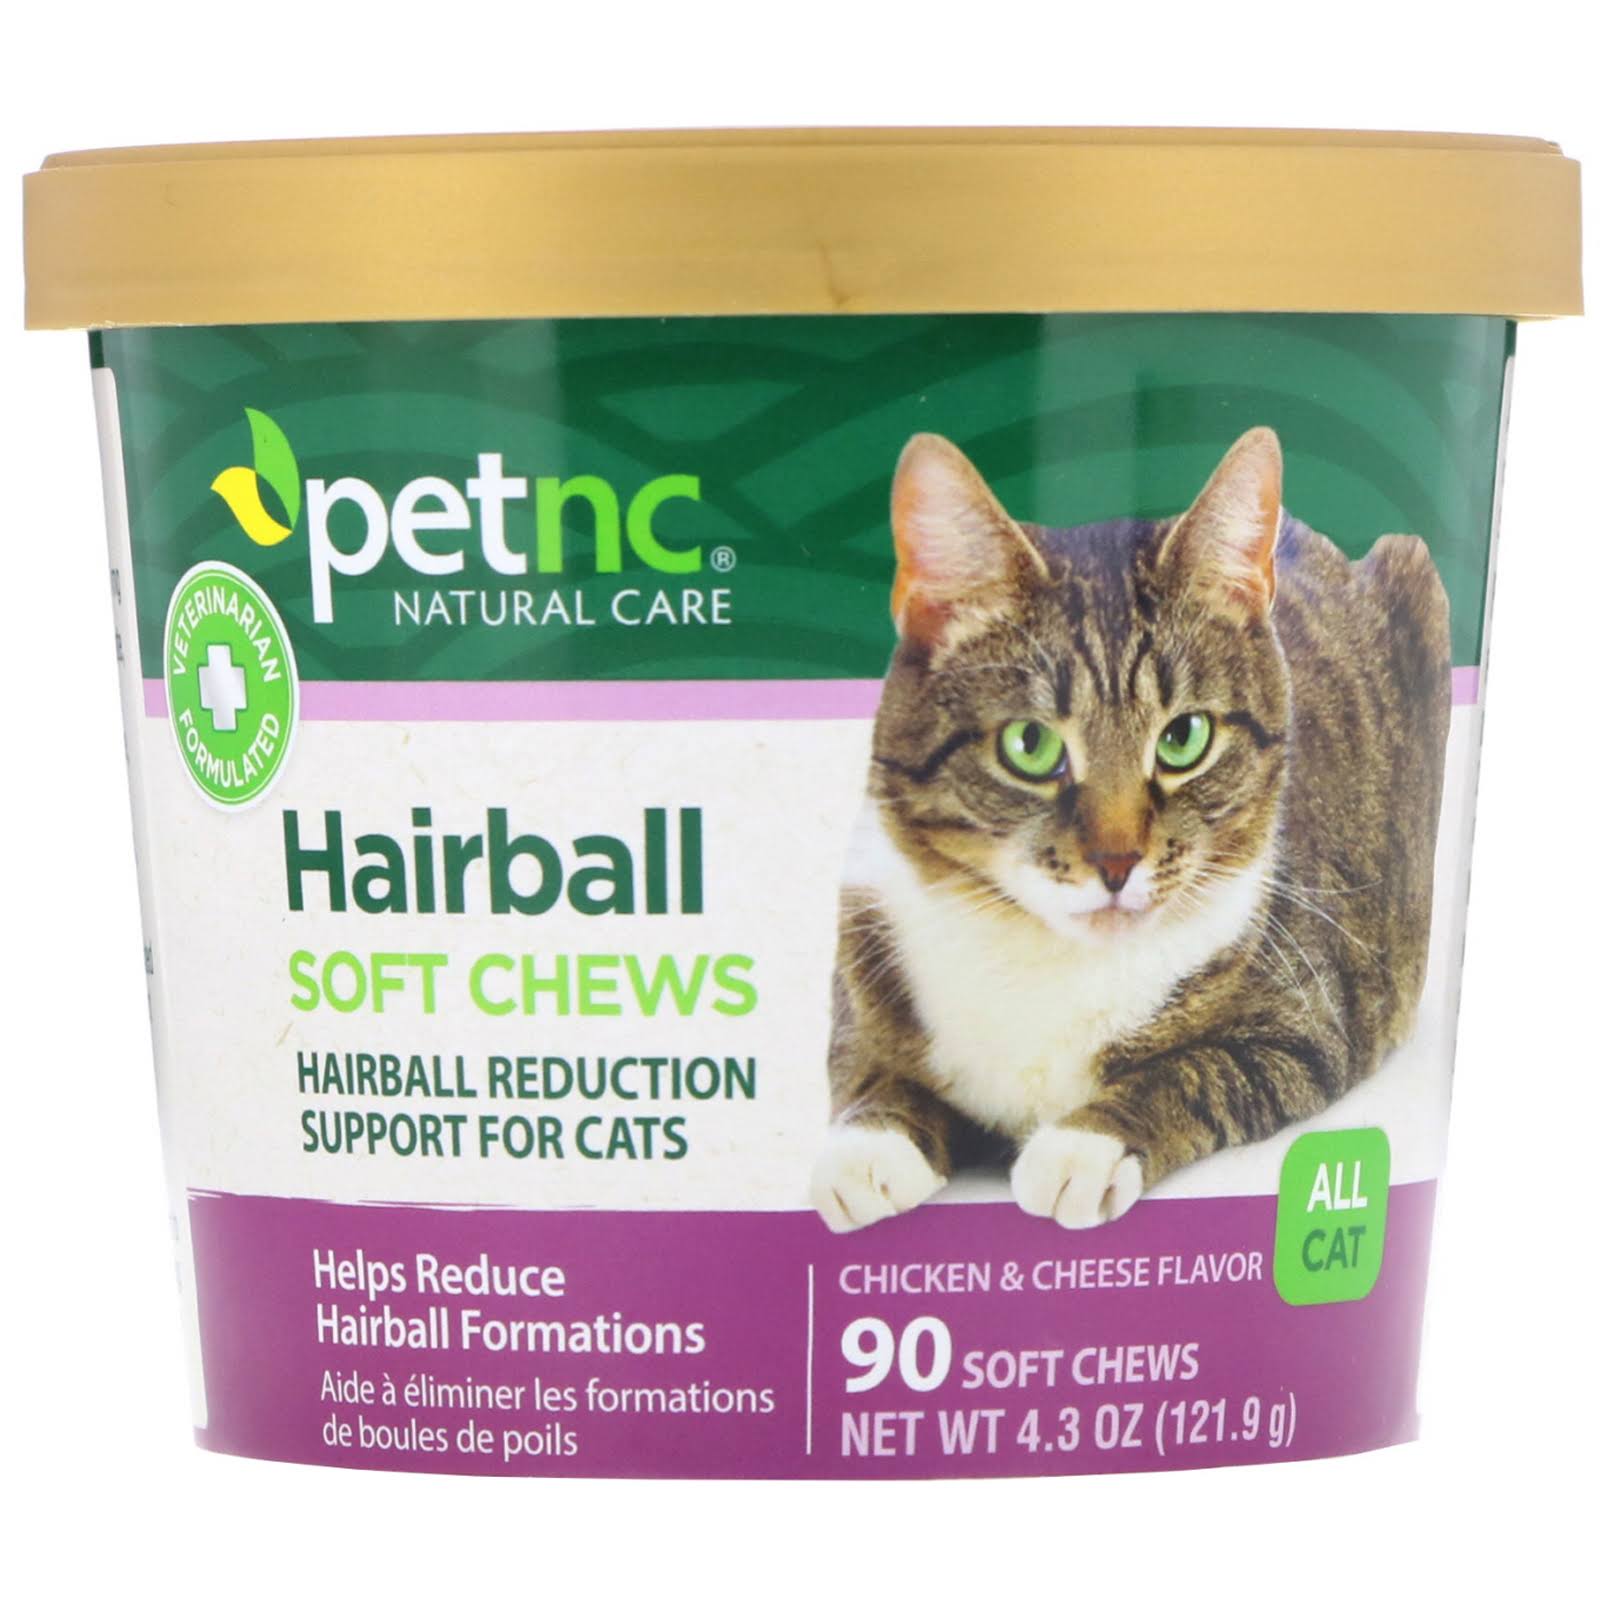 PetNC Natural Care Cat Hairball - 90 Soft Chews